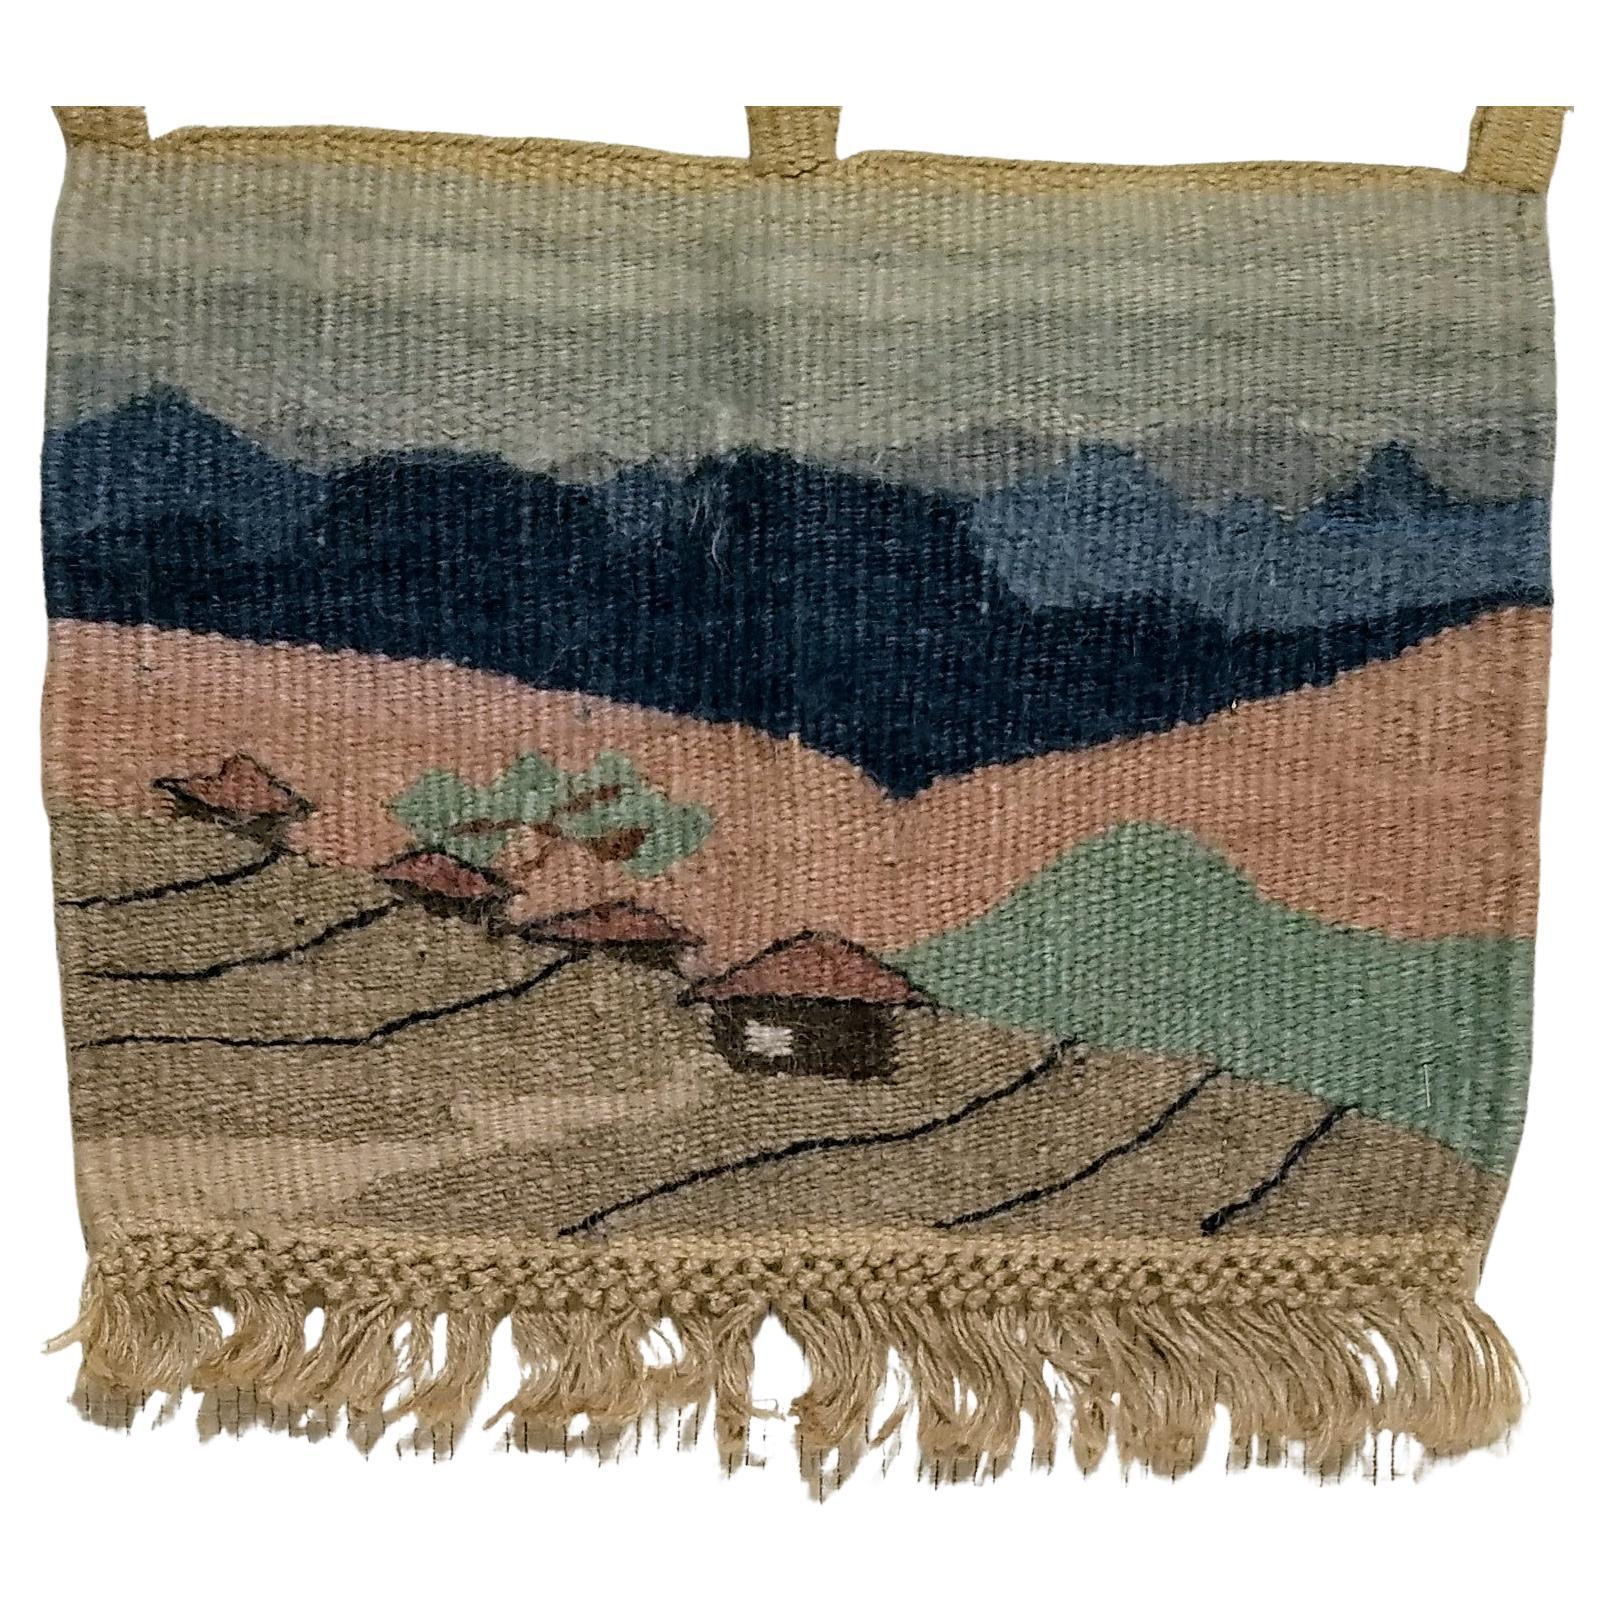 Vintage Hand Woven African Tapestry Depicting Village and Mountain Landscape 